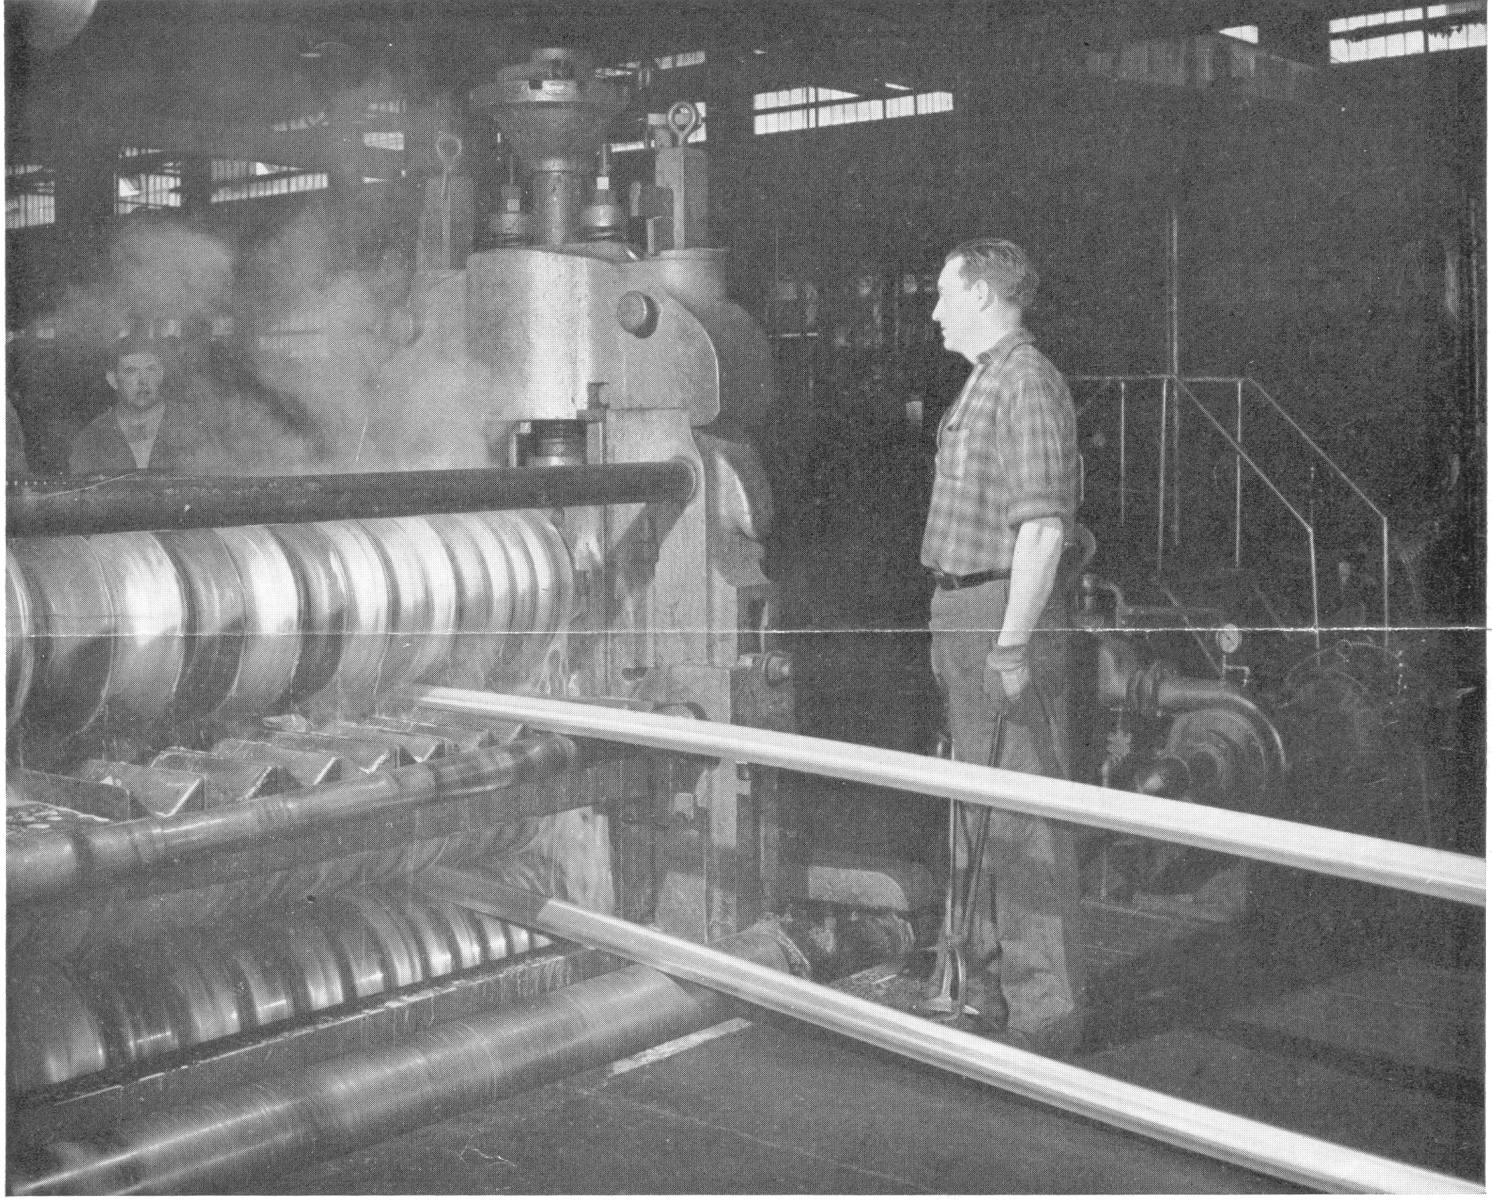 Bloom Going Through Roughing Mill [MA-3-5-1945]